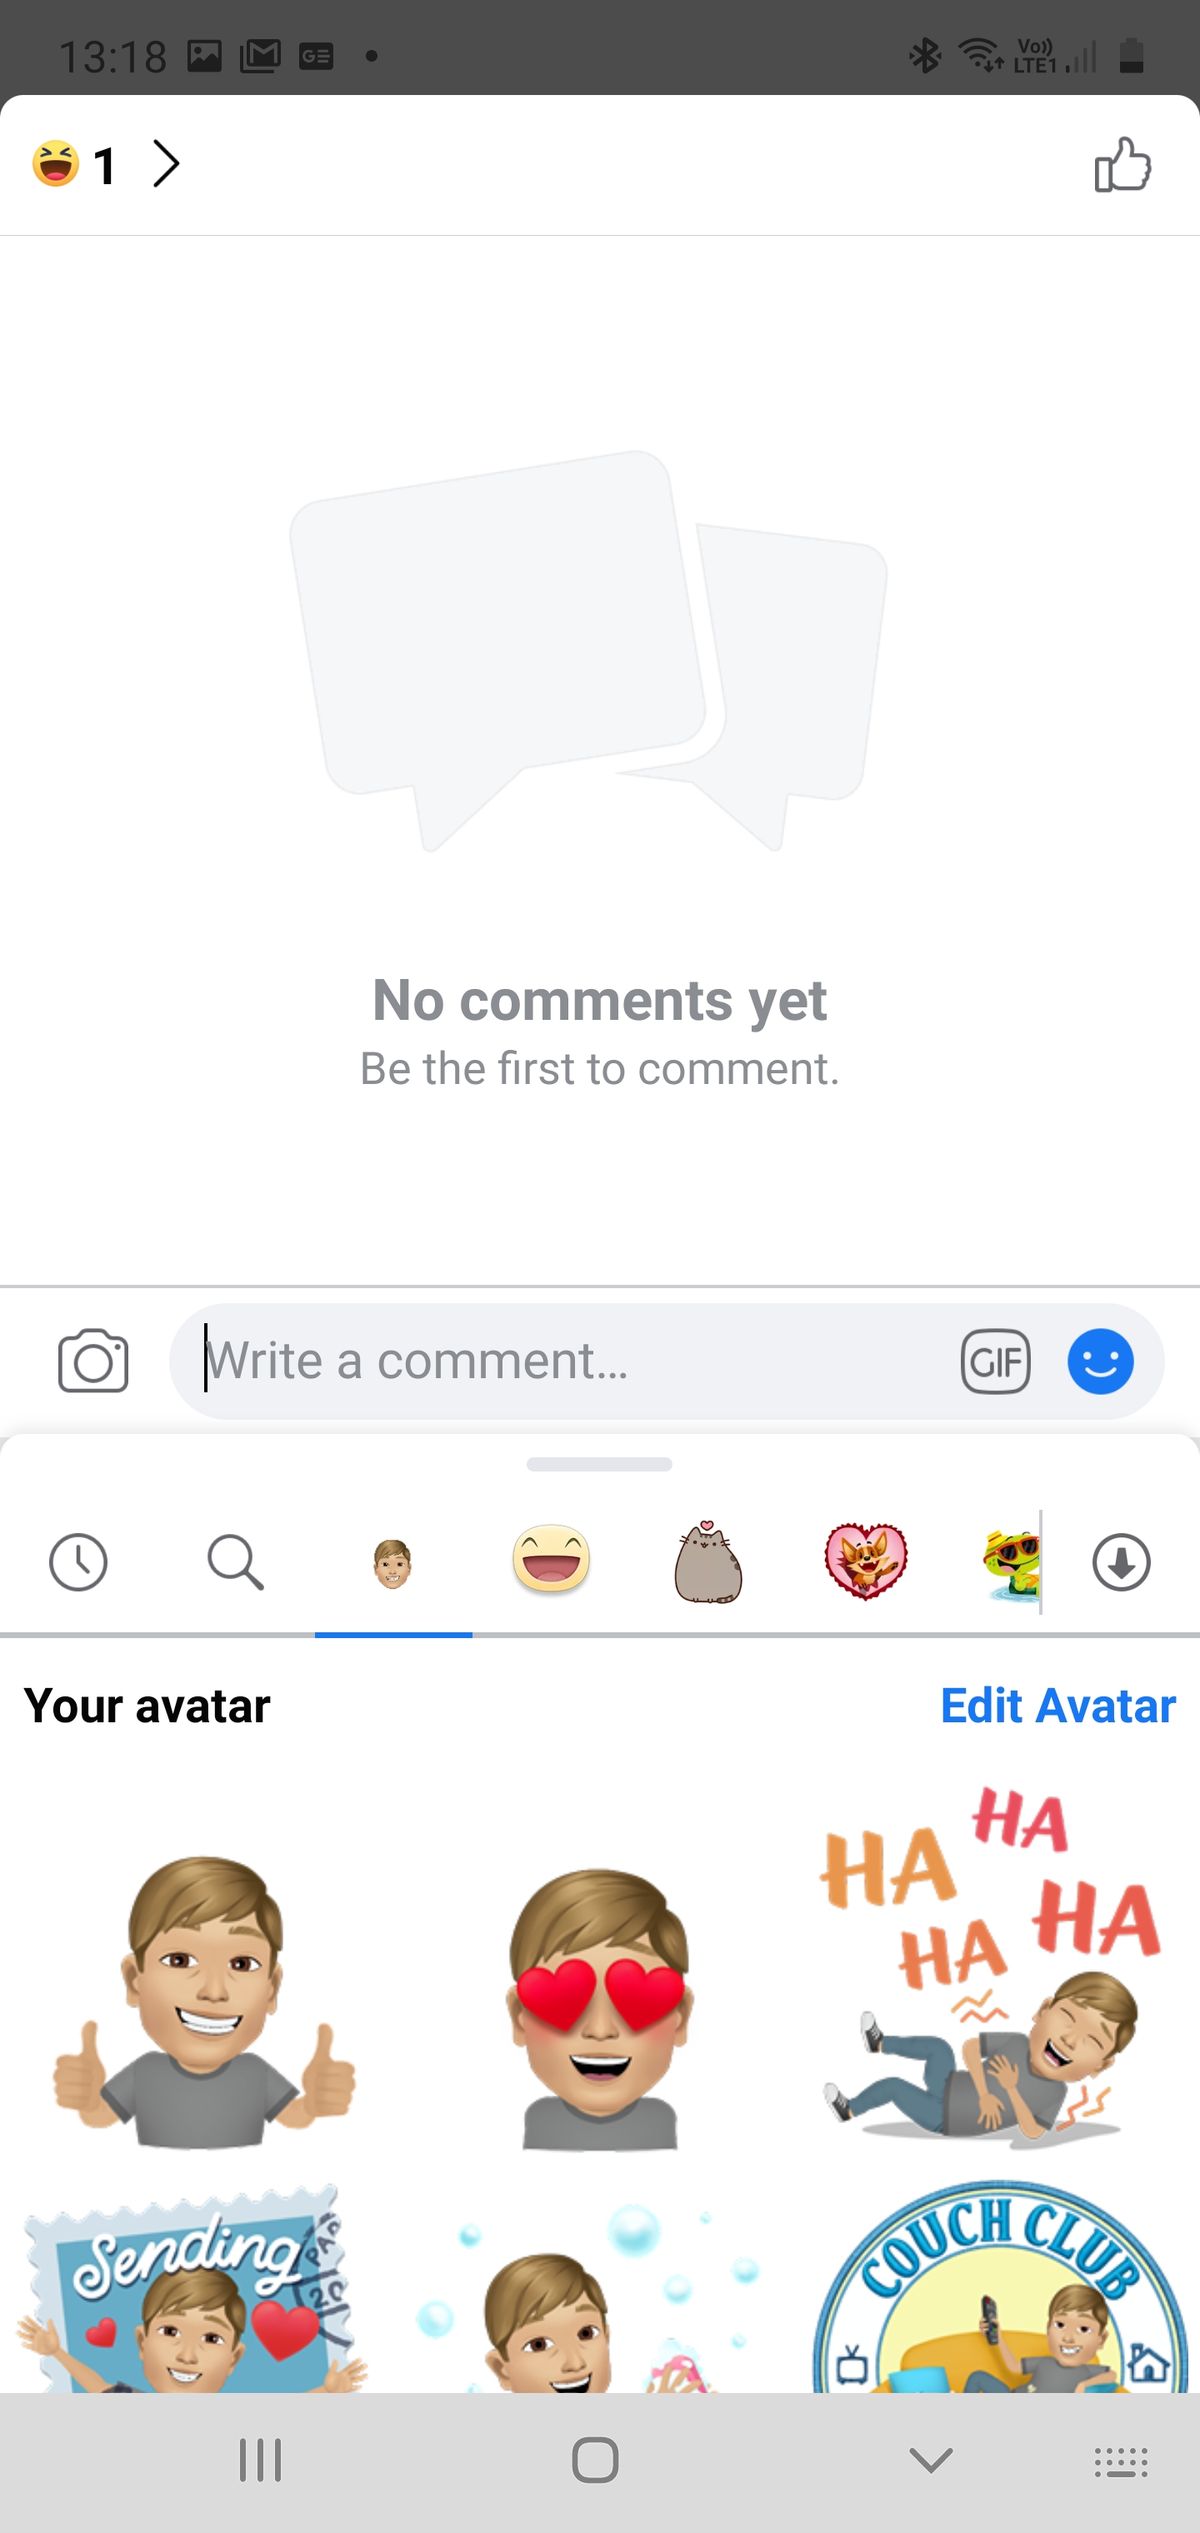 How to make your own Facebook avatar | Tom's Guide